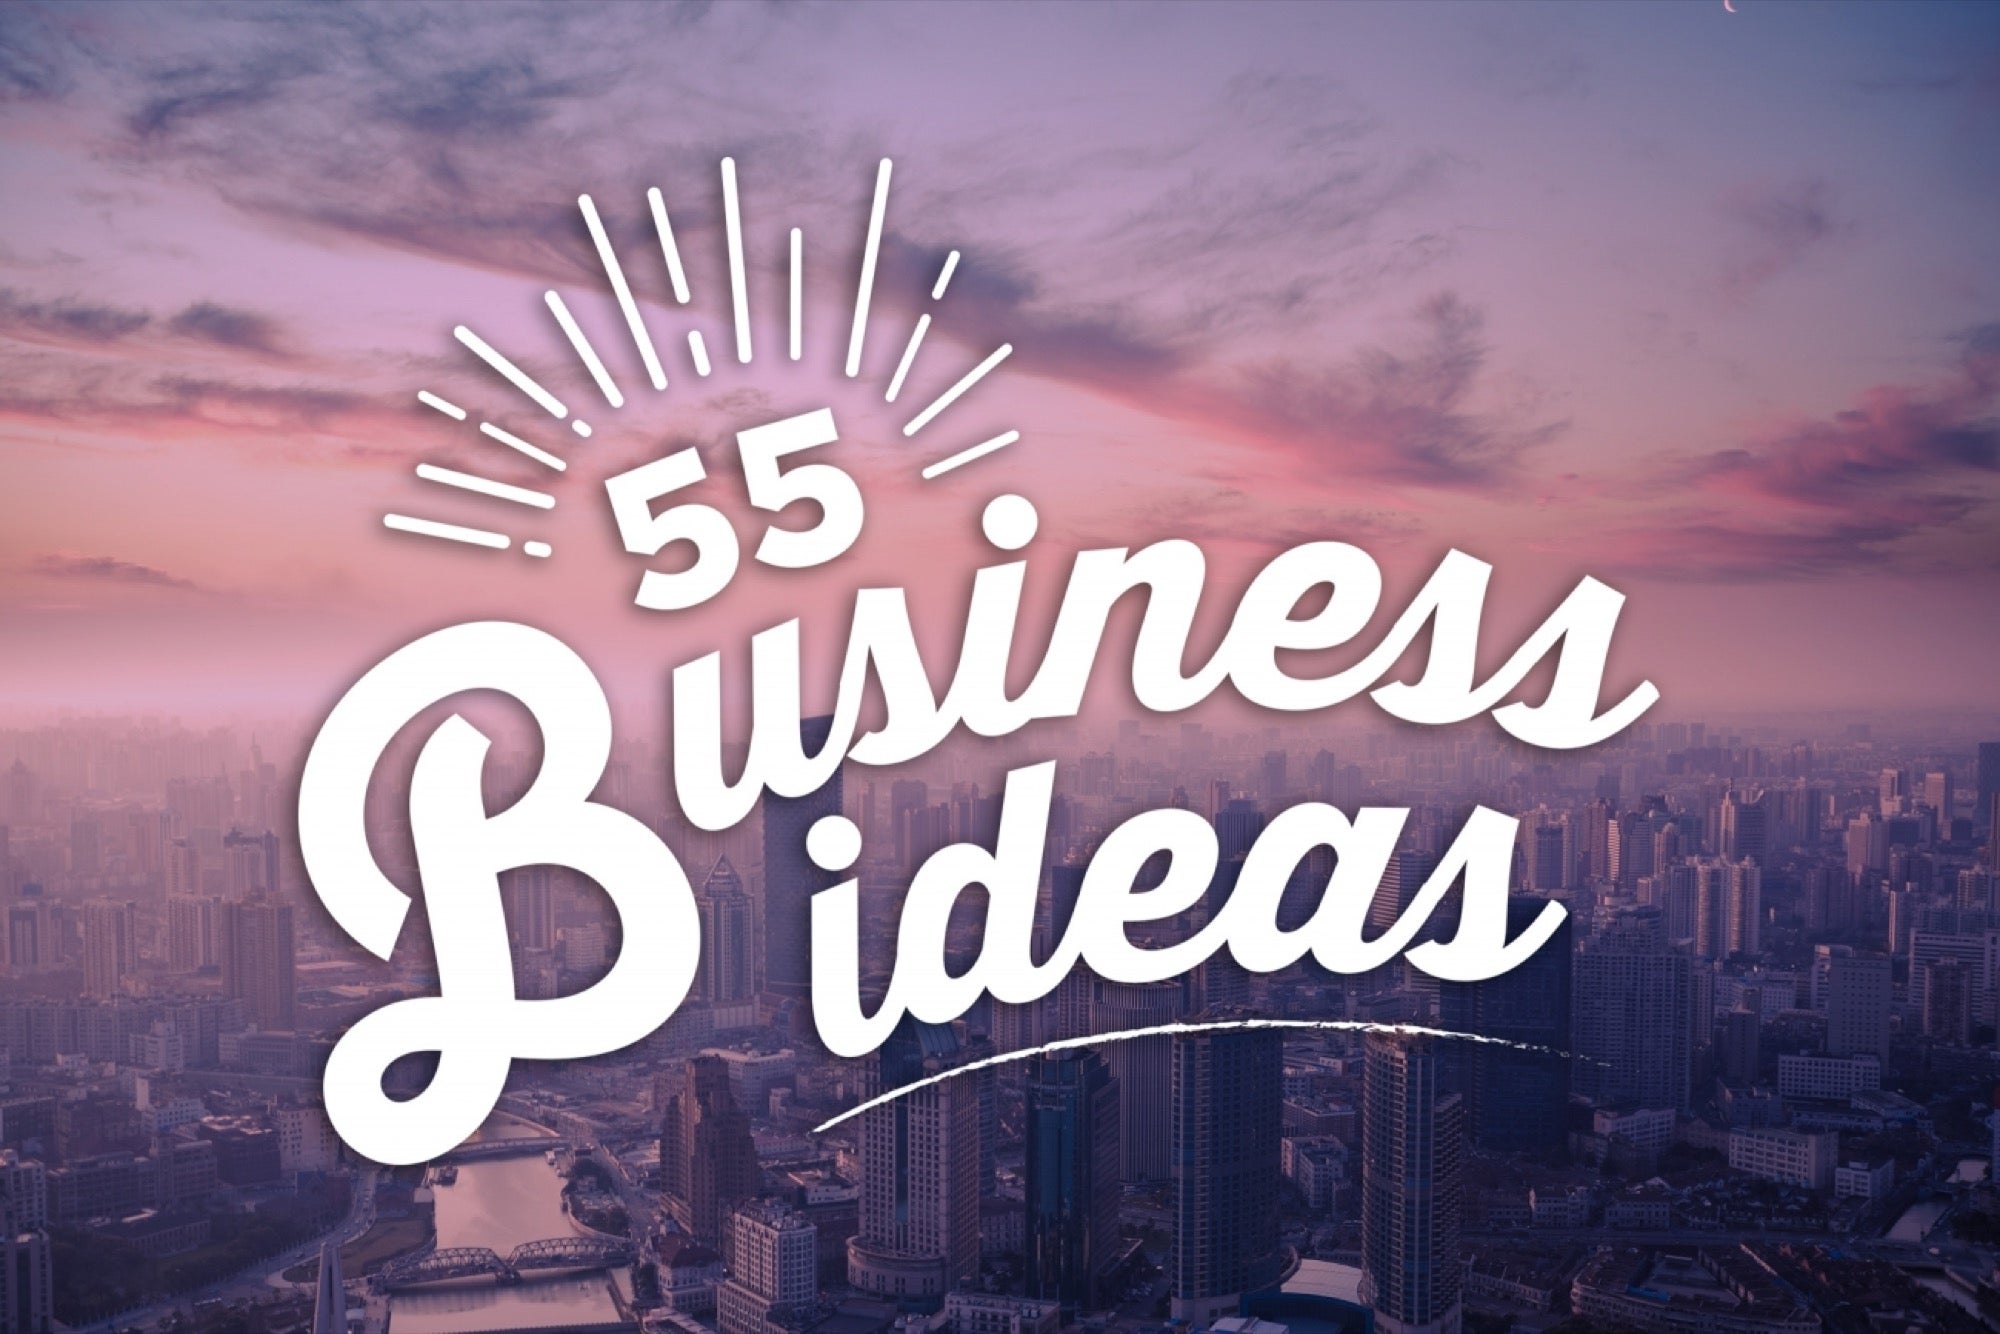 Need a Business Idea? Here Are 55.